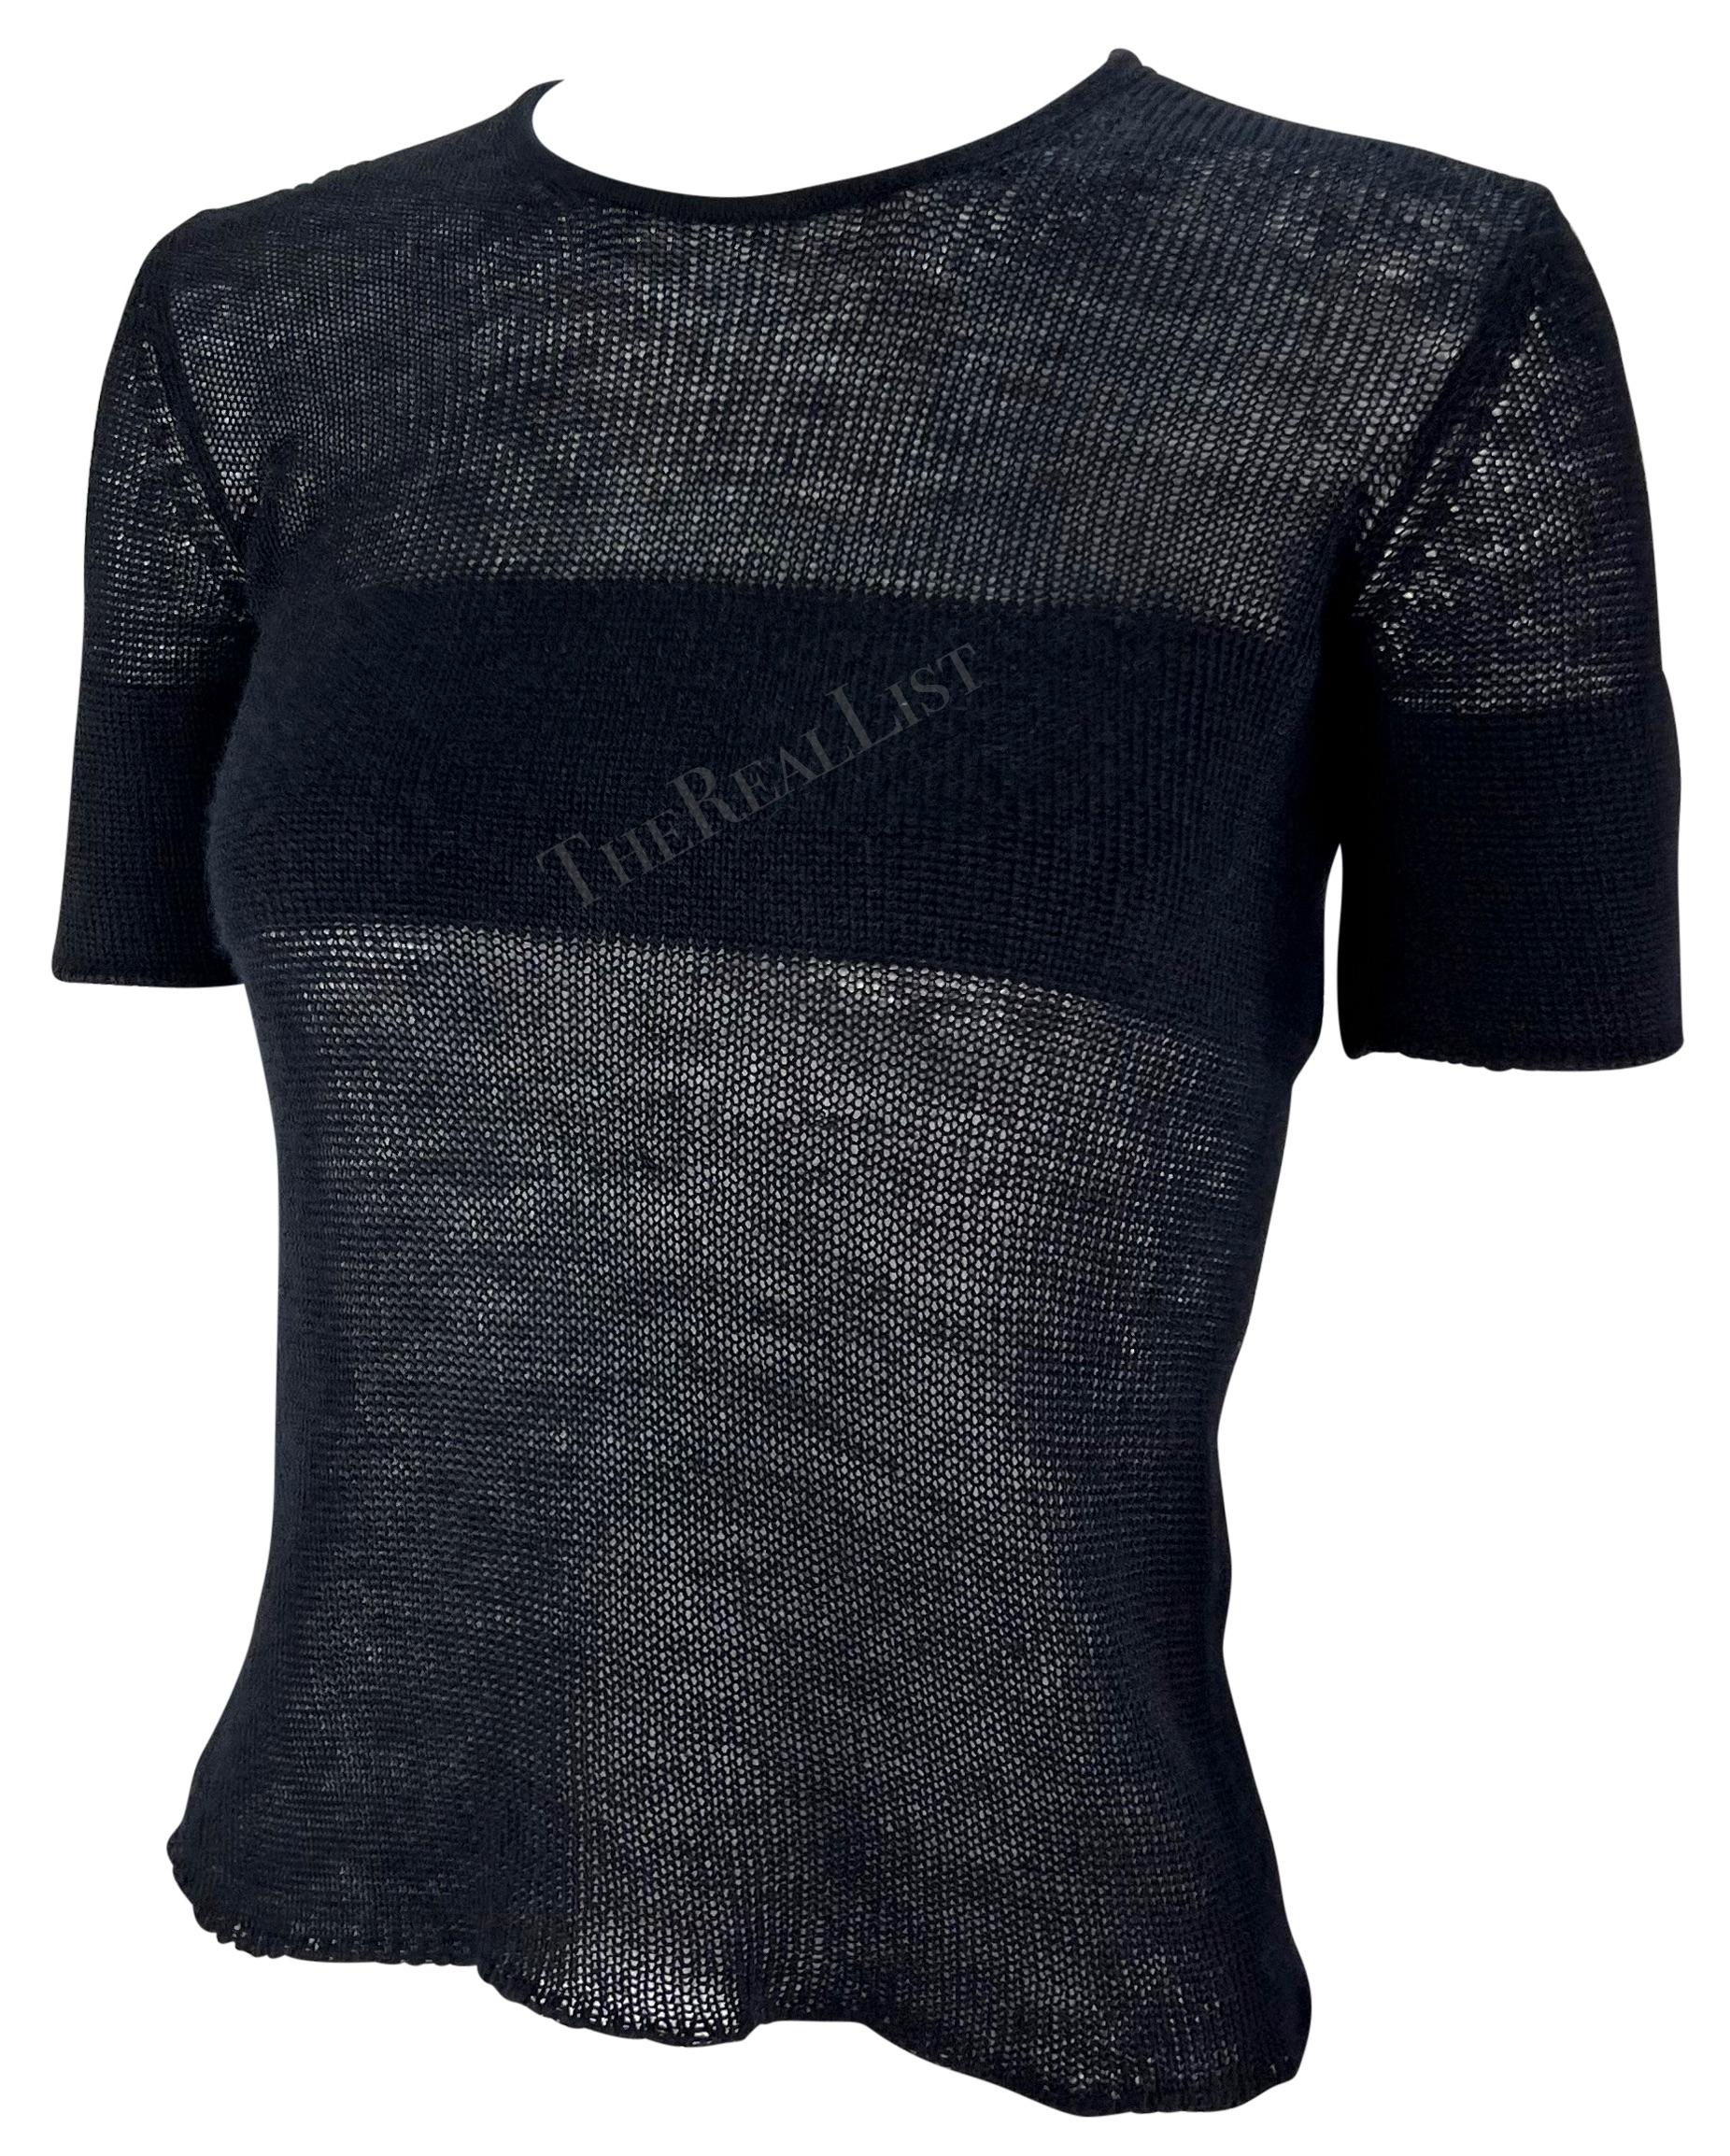 From the 1990s, this fabulous navy blue knit Giorgio Armani short sleeve shirt semi-sheer top is entirely constructed of knit cashmere. The upper part of the top is snugly woven to cover and fit around the bust and arms, while the lower part of the